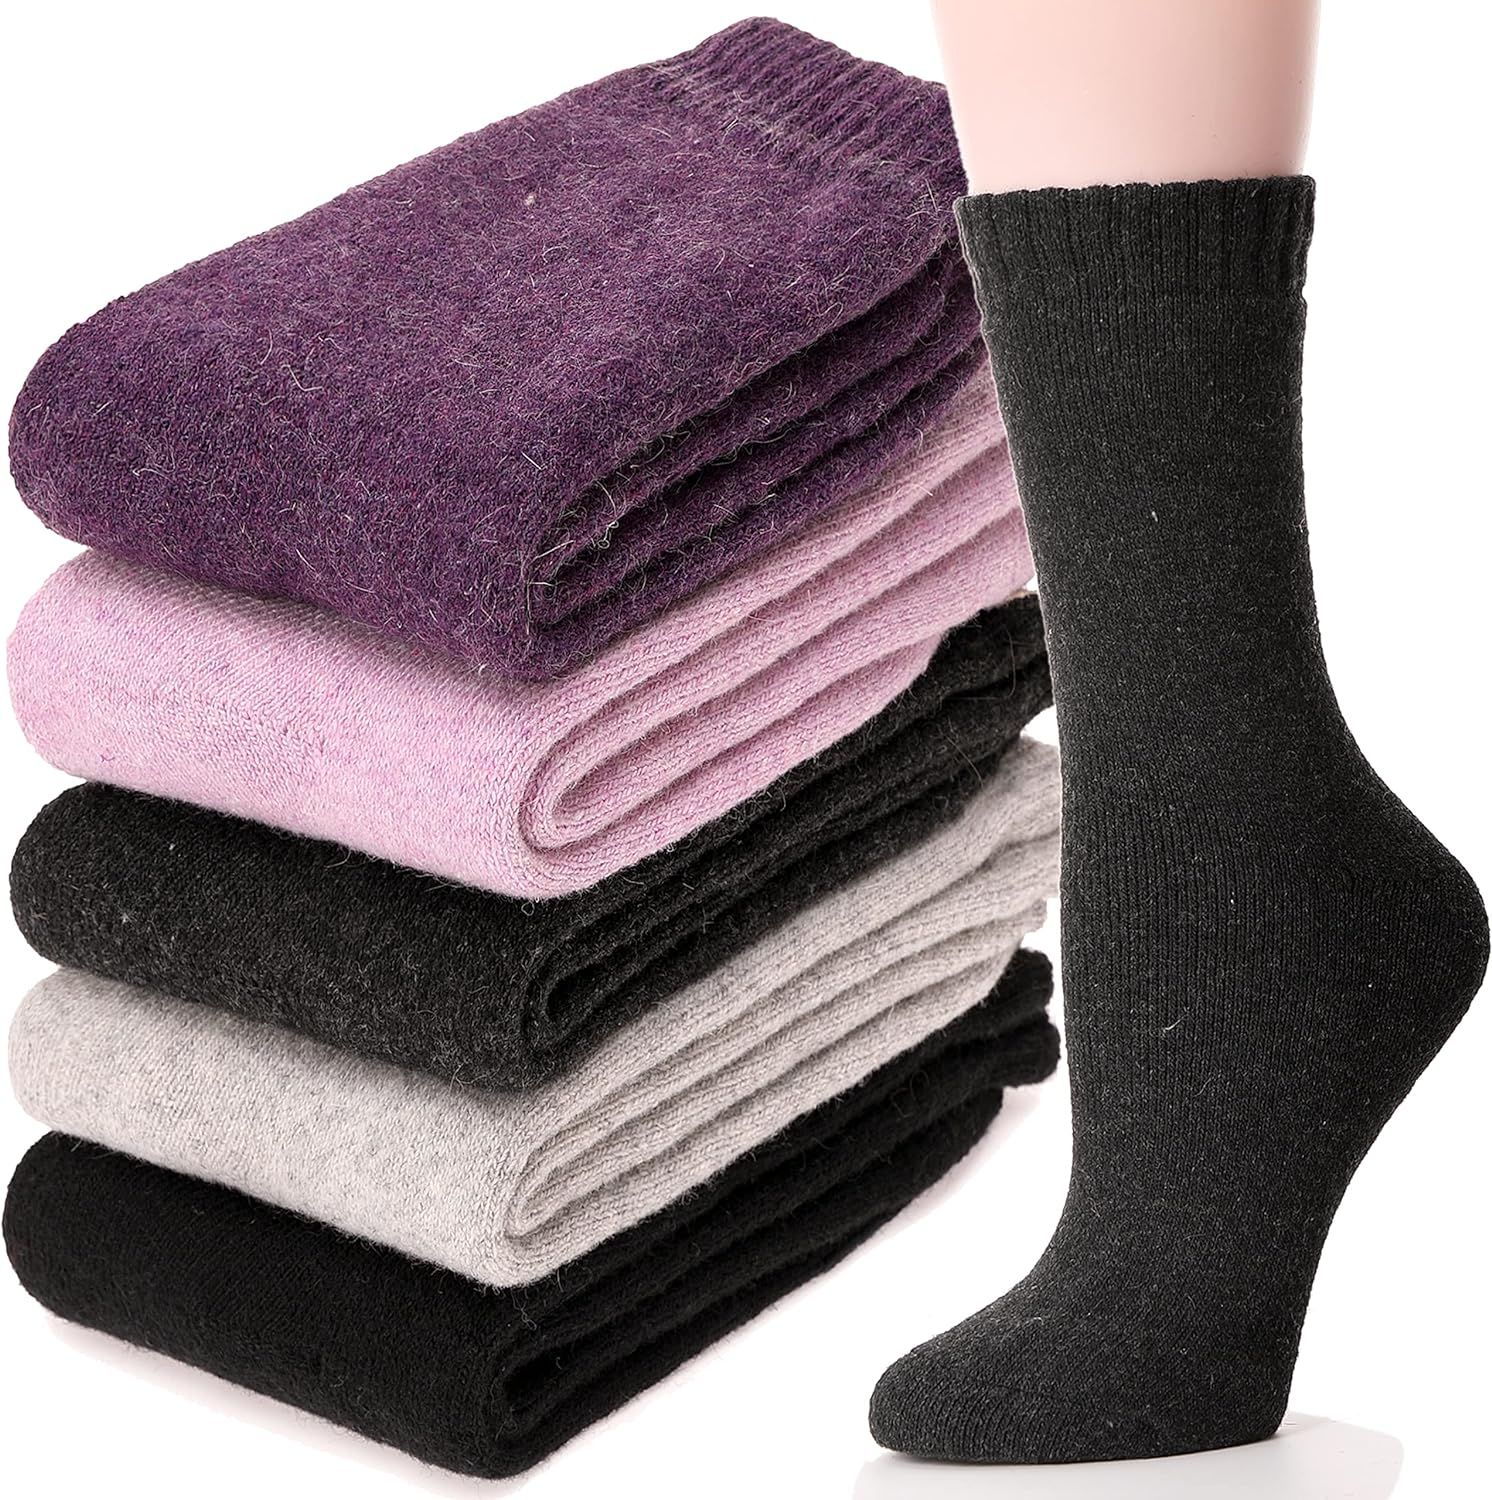 Sandsuced Wool Socks for Women Hiking Warm Thick Cozy Boot Winter Thermal Work Soft Ladies Socks 5 P | Amazon (US)